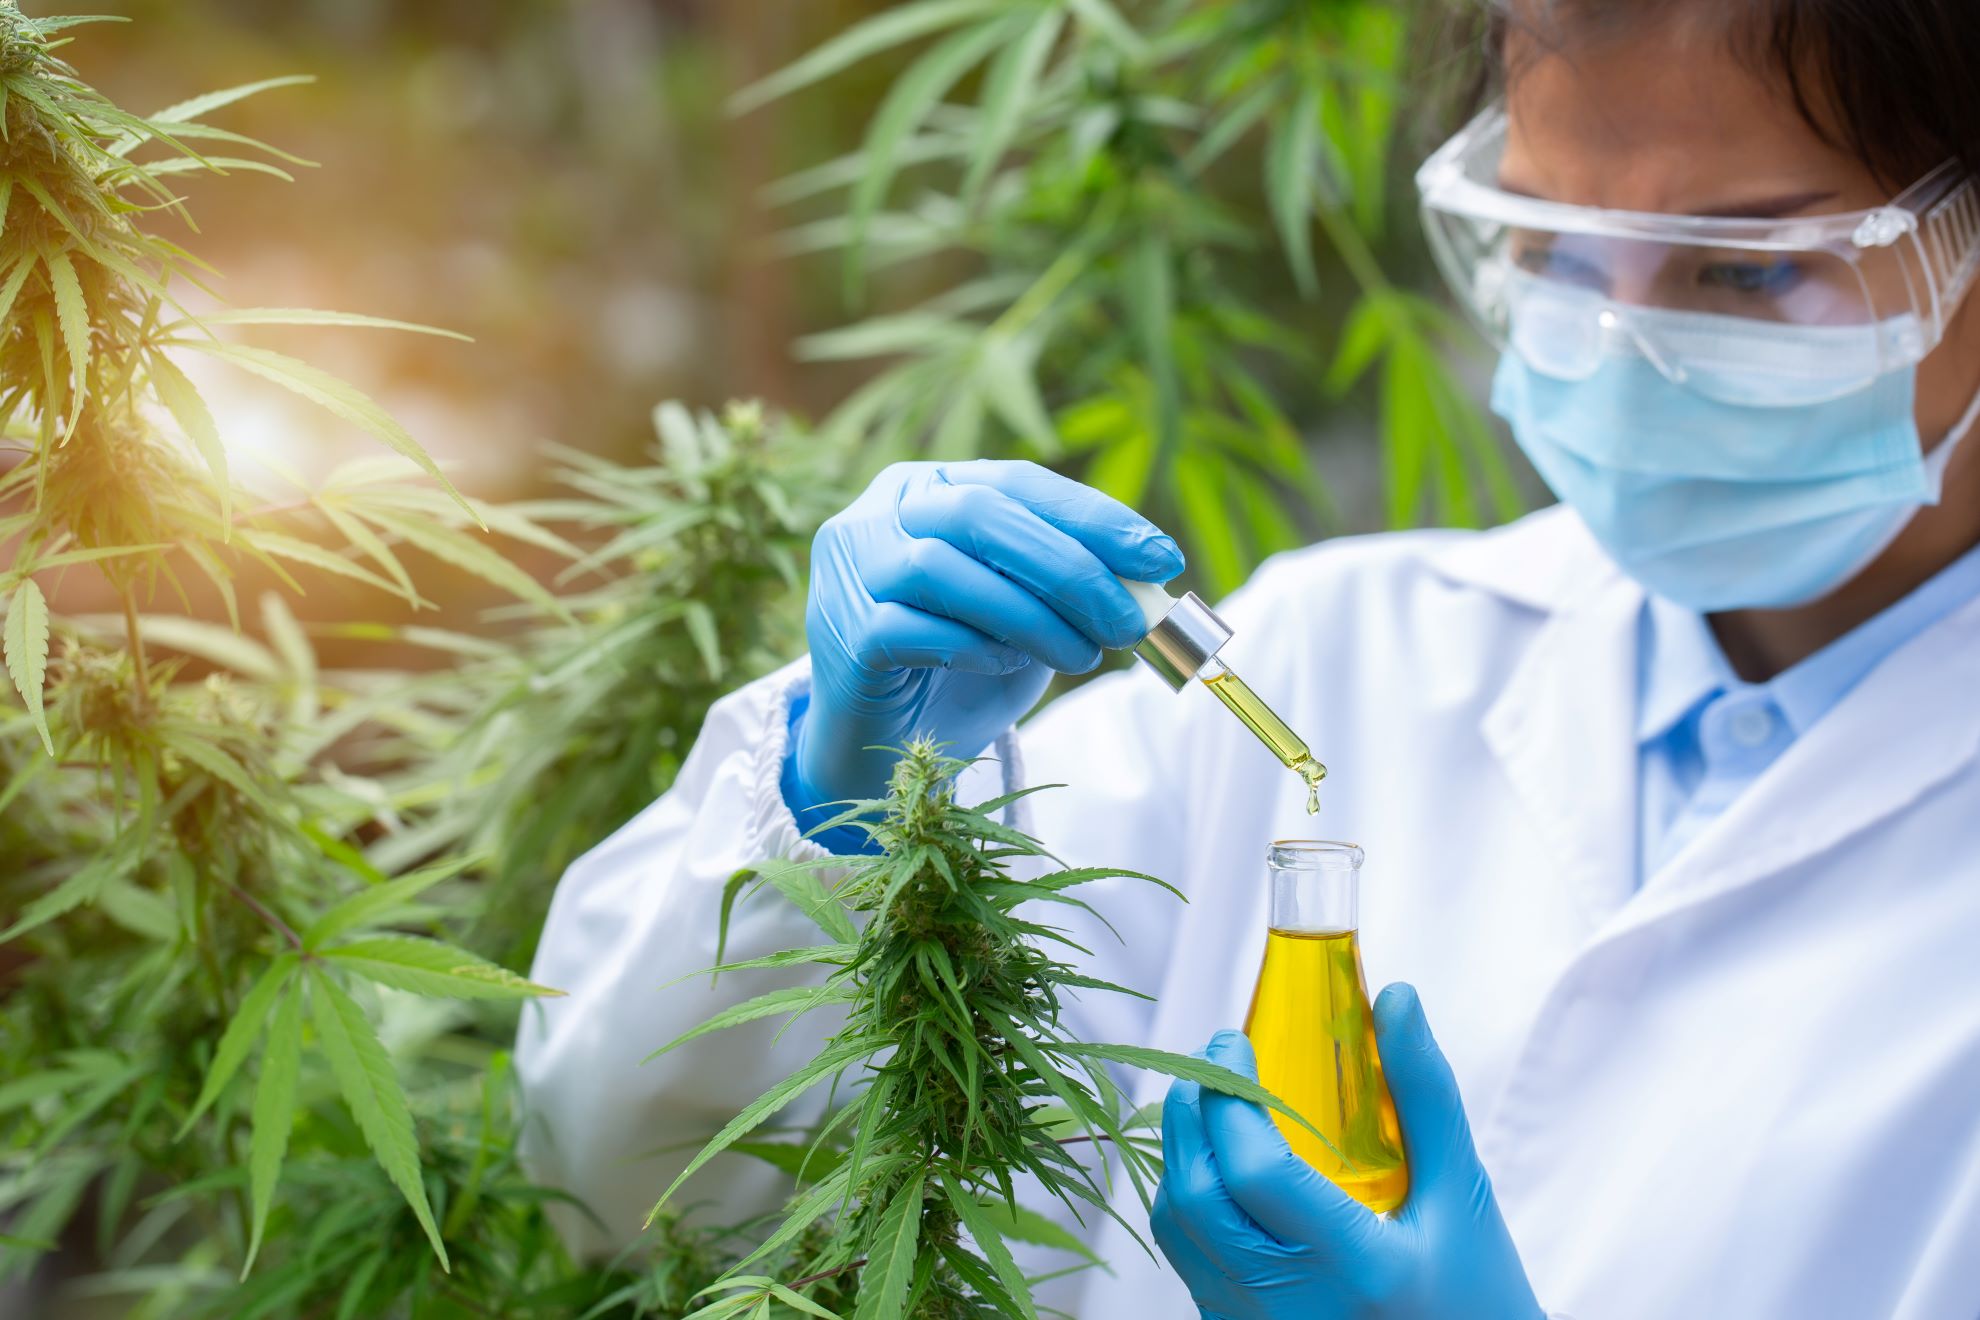 <p>A consortium of nine universities in Florida, led by two professors at UF, is in the early stages of investigating medical marijuana. Photo Credit: Shutterstock</p>